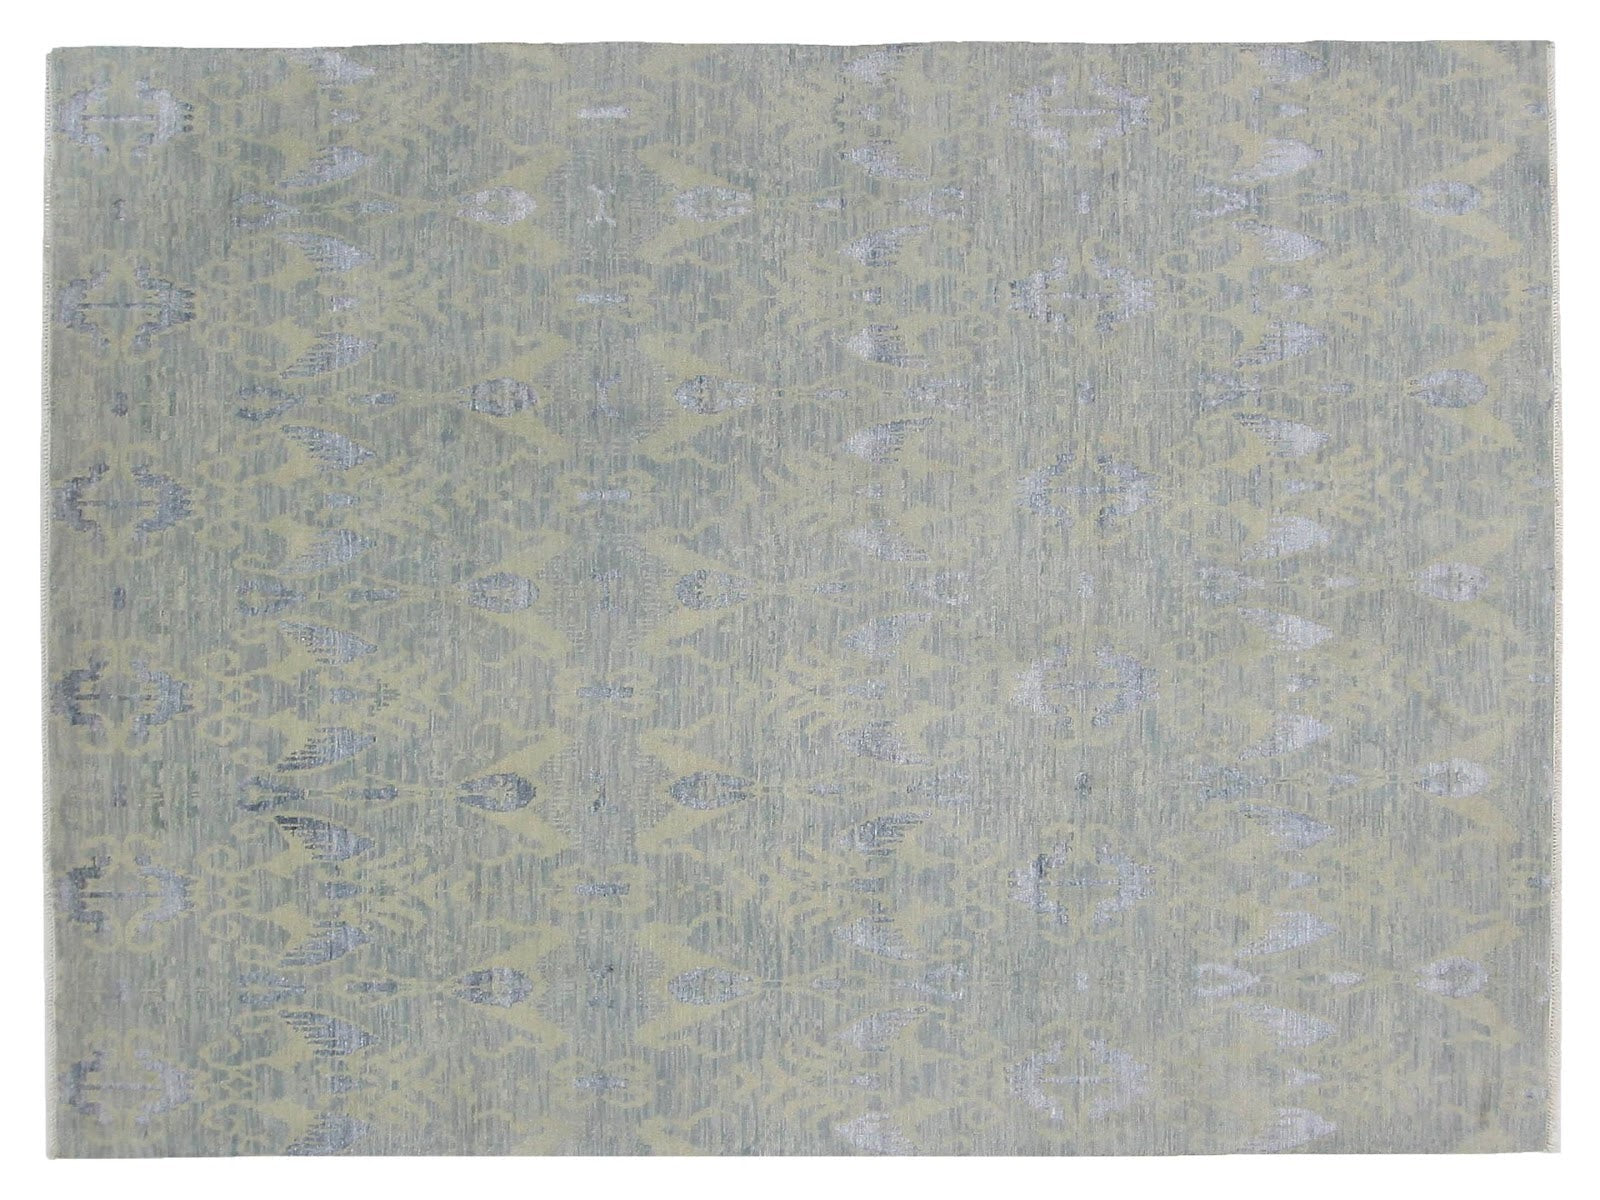 9x12 transitional wool rug featuring a blend of blueish grays and faded traditional motifs, hand-knotted in Pakistan